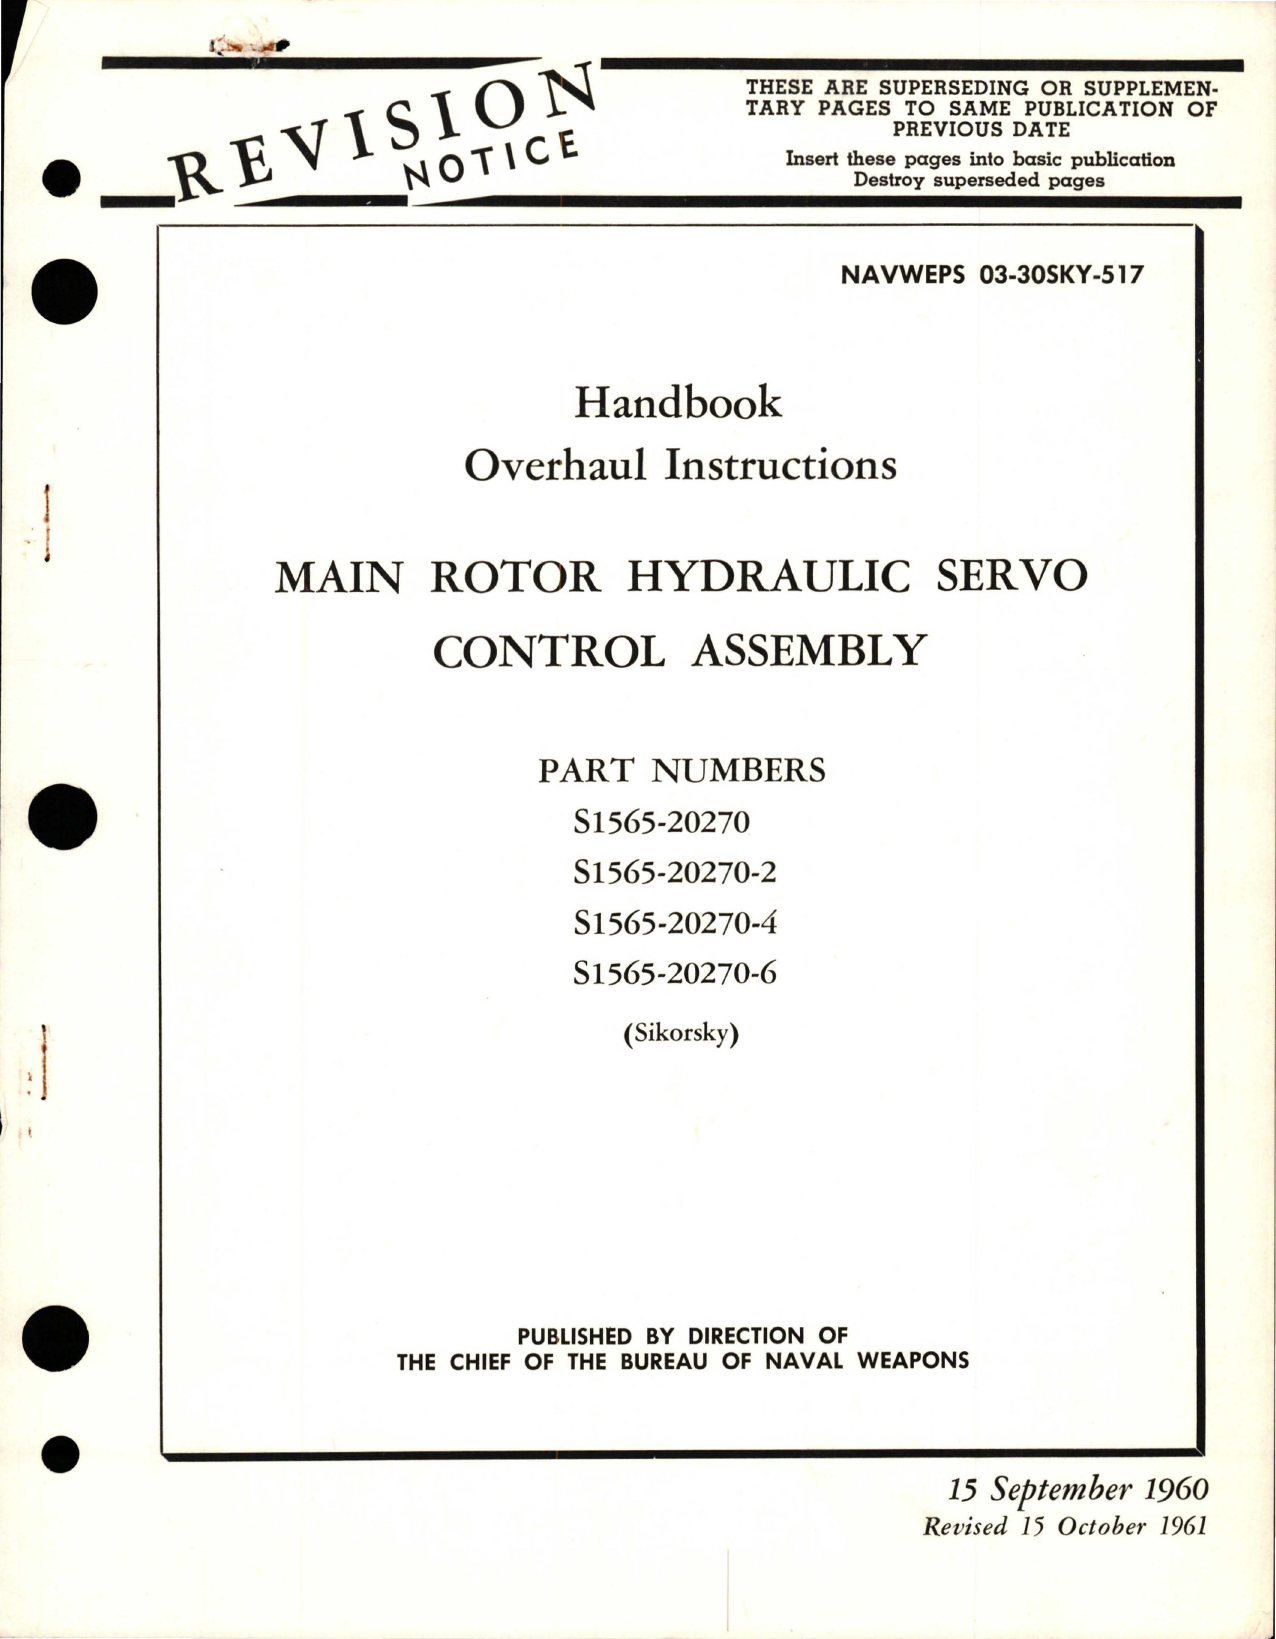 Sample page 1 from AirCorps Library document: Overhaul Instructions for Main Rotor Hydraulic Servo Control Assembly - Parts S1565-20270, S1565-20270-2, S1565-20270-4, and S1565-20270-6